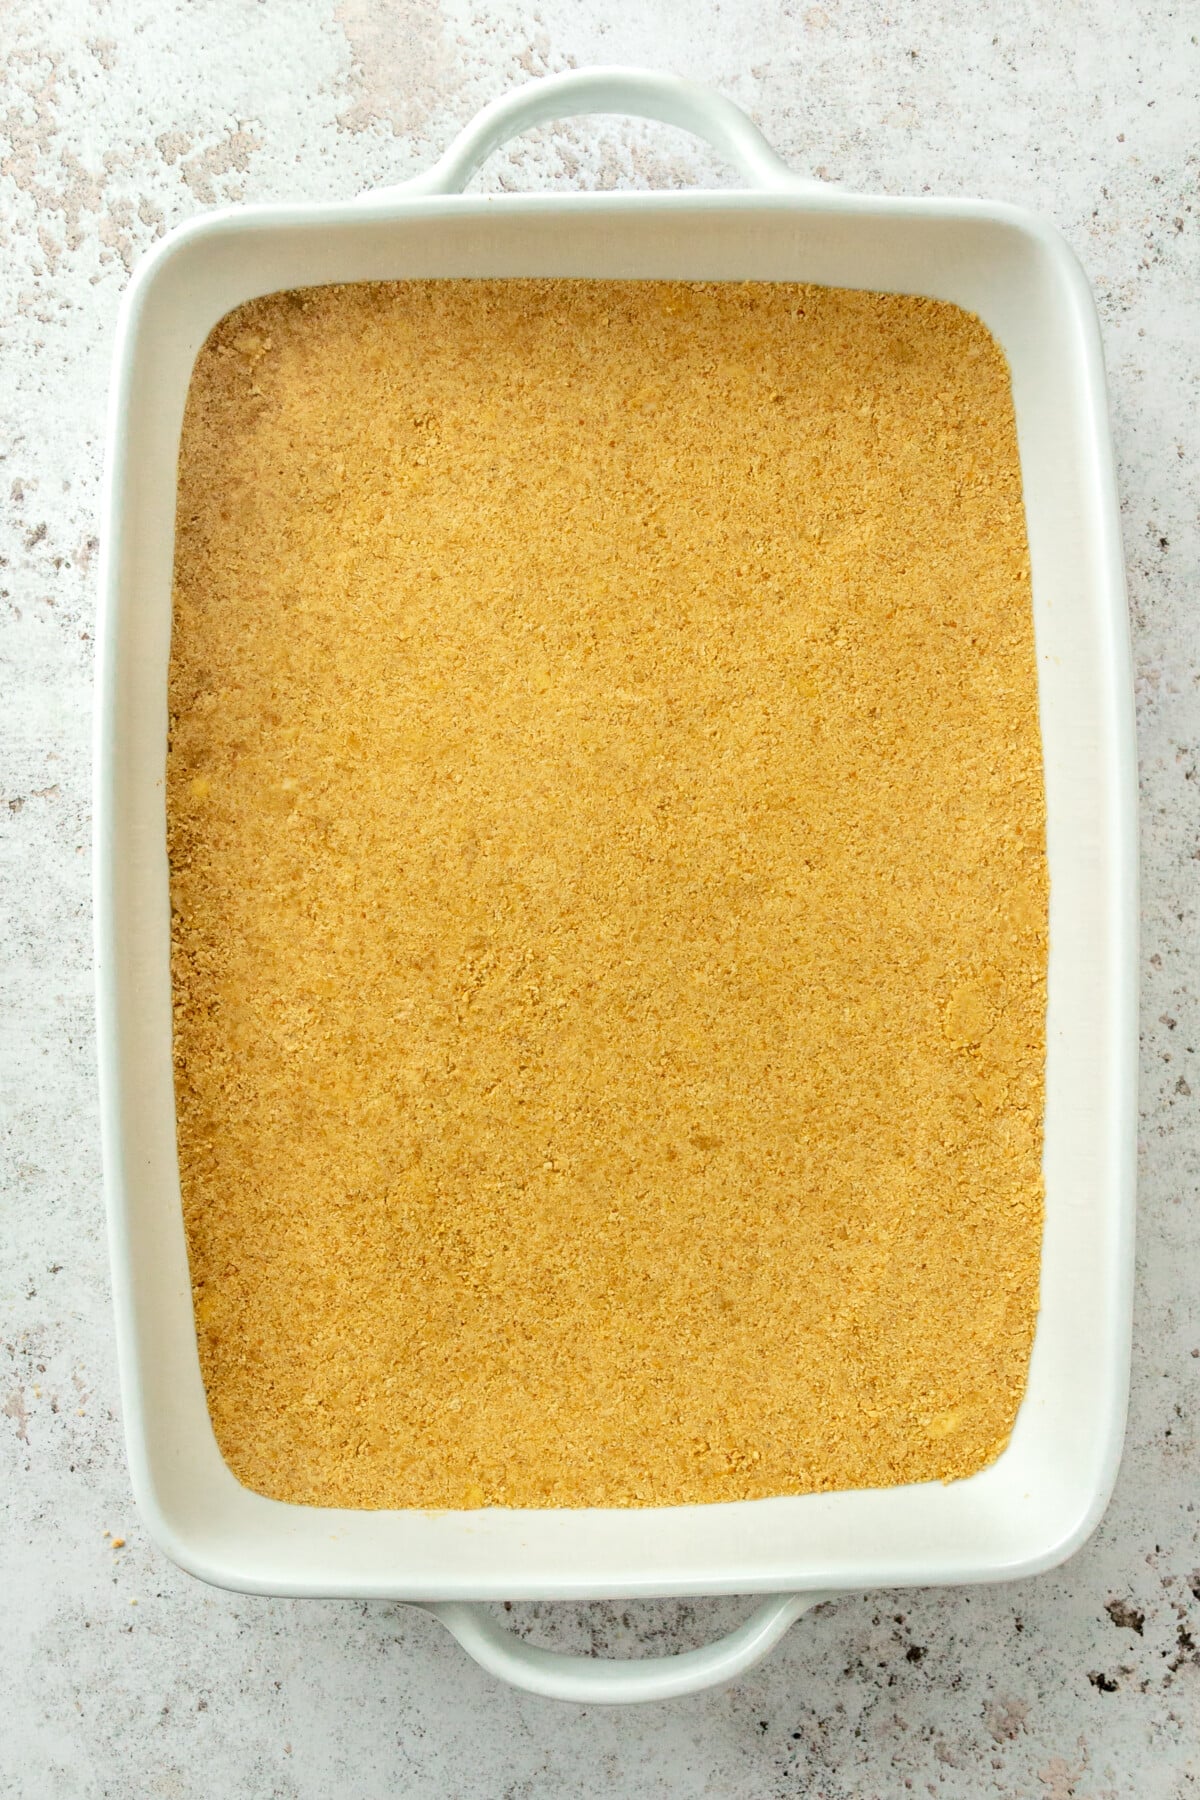 The graham cracker mixture is shown pressed into an even layer in the bottom of a white rectangular baking dish.